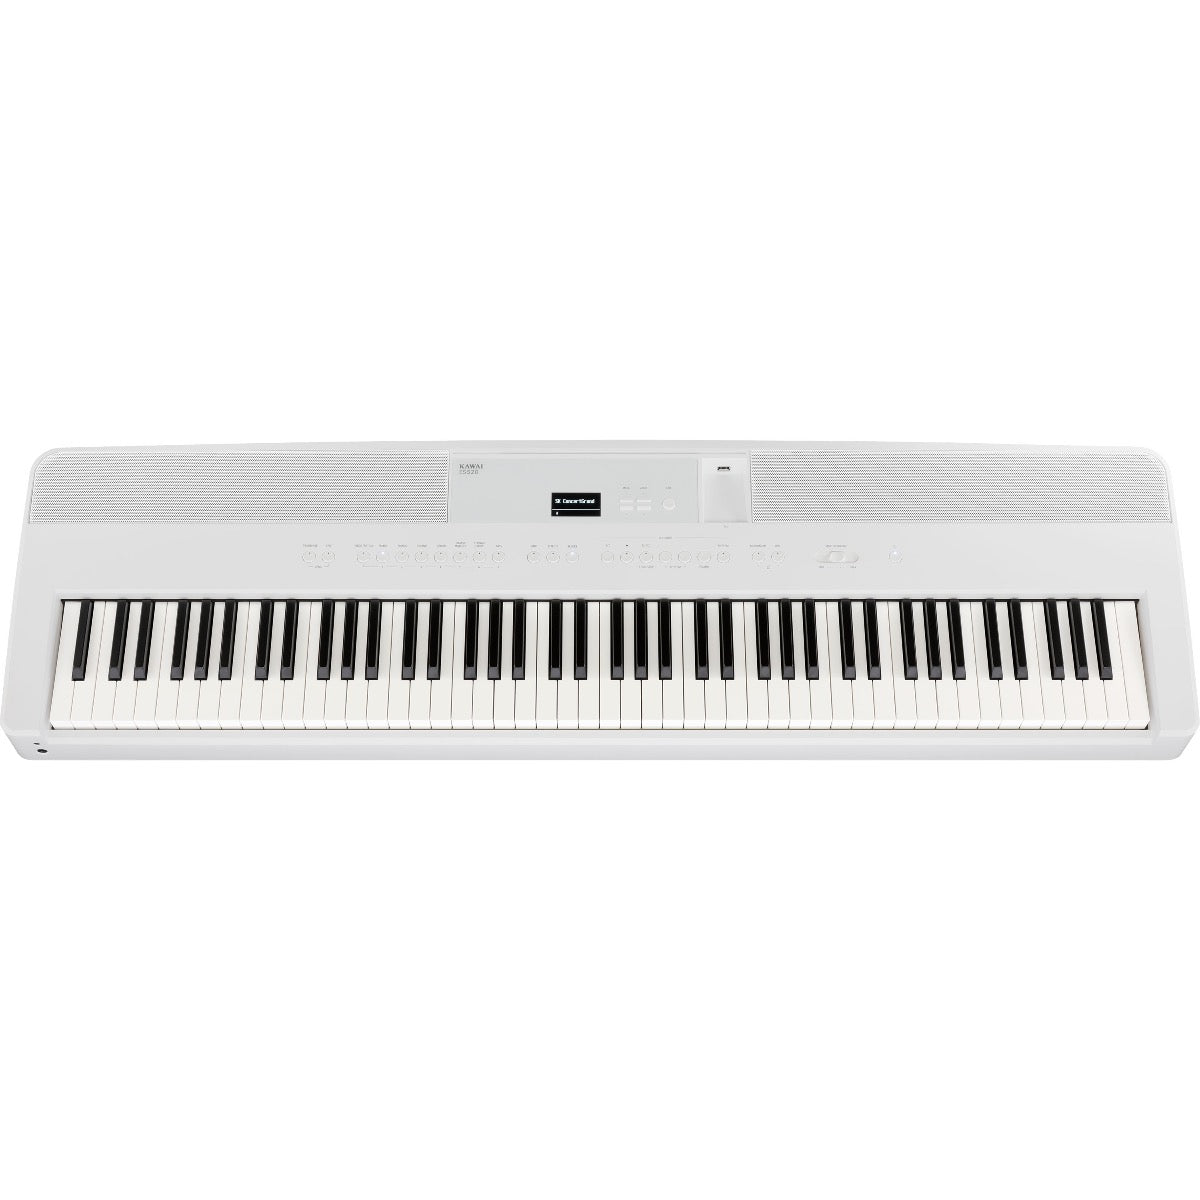 Perspective view of Kawai ES520 Portable Digital Piano - White showing top and front